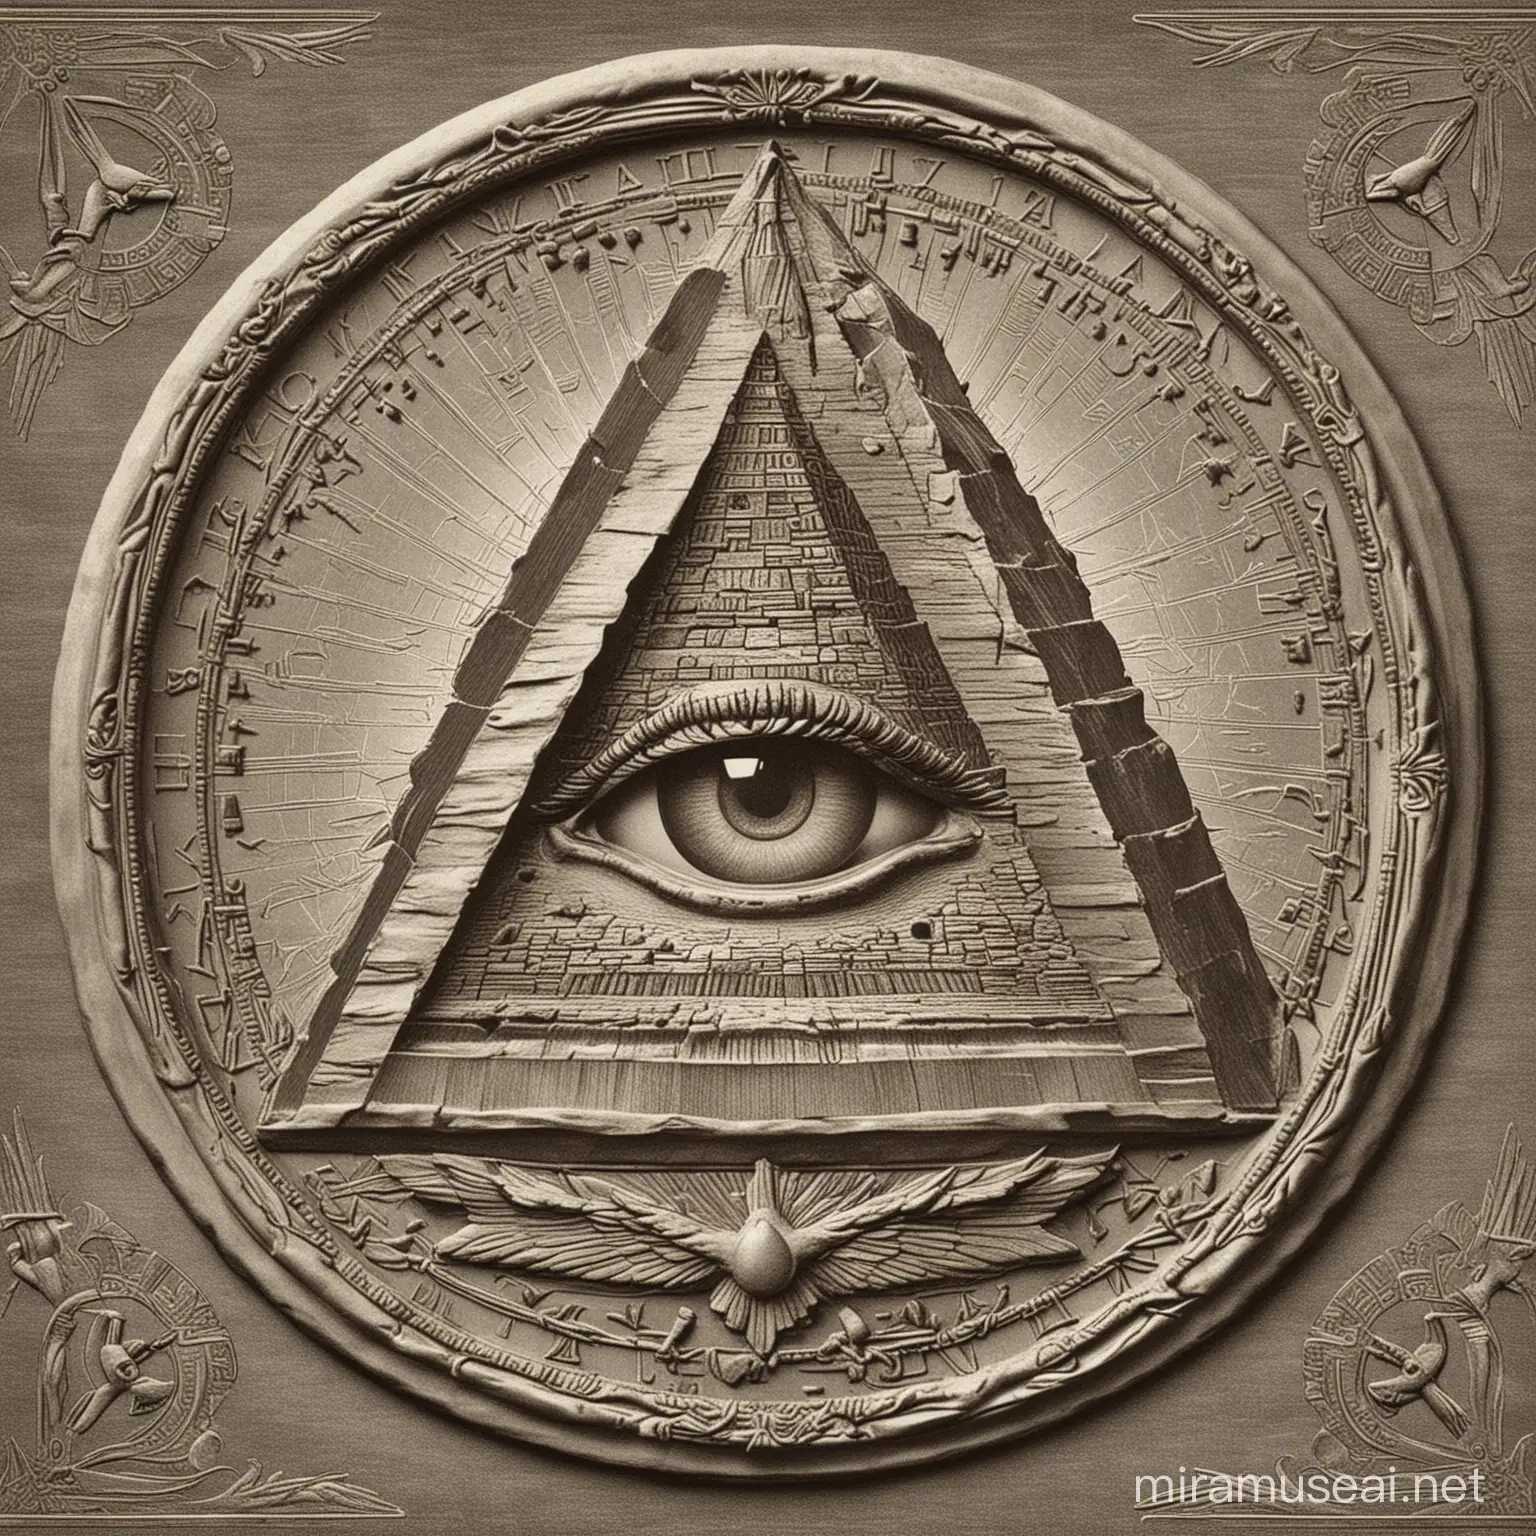 Retro Engraved Illustration of the Great Seal of the United States with Pyramid and Eye of Providence